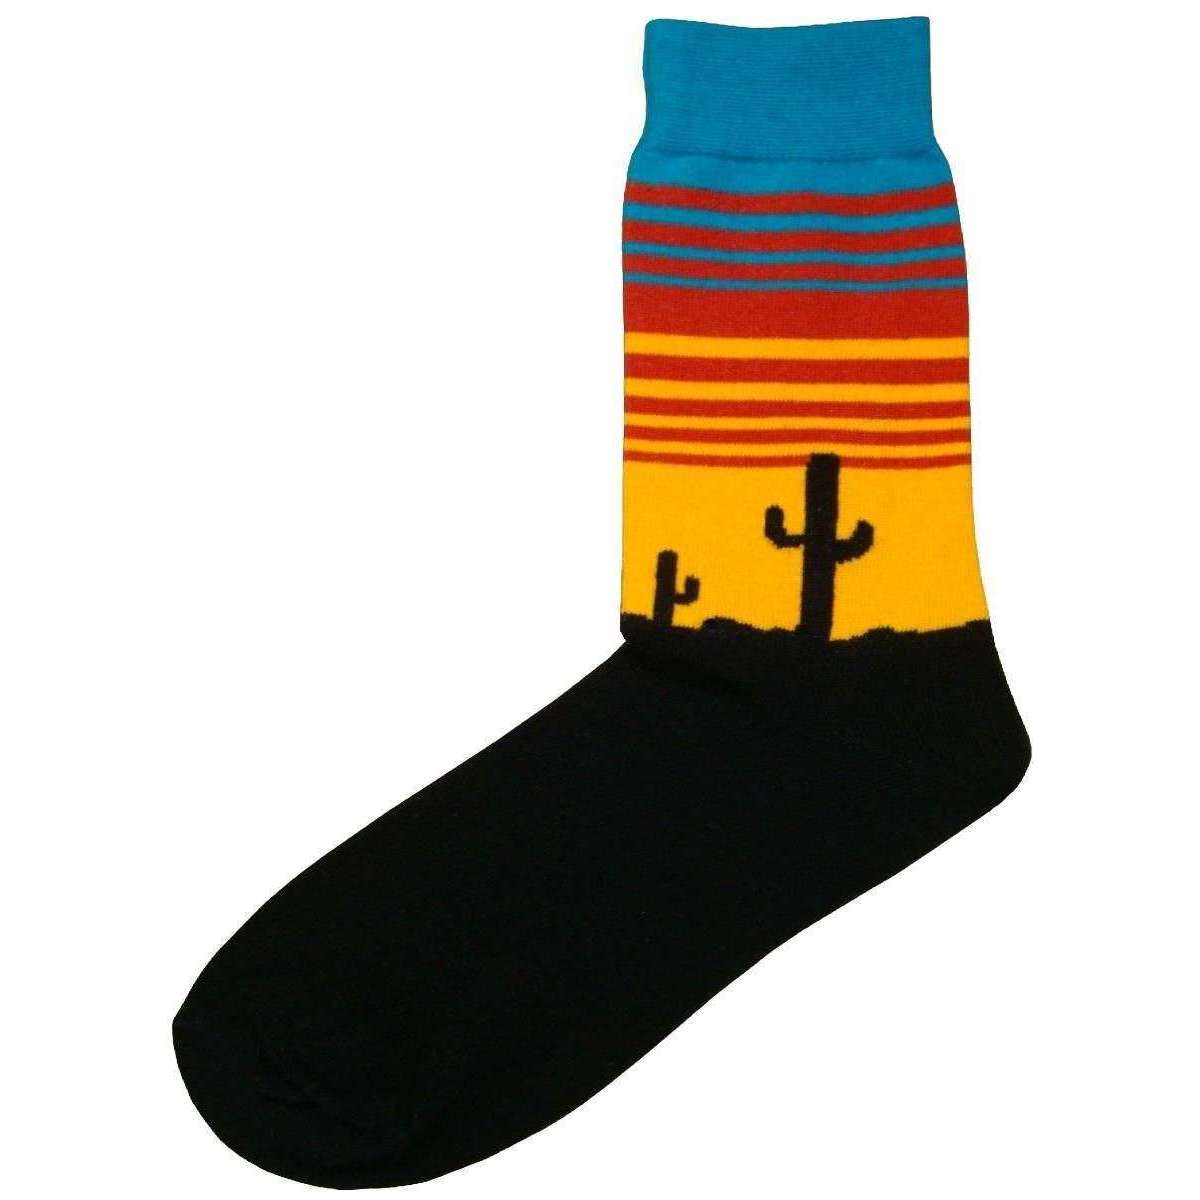 Bassin and Brown Cactus Socks - Black/Blue/Yellow/Red